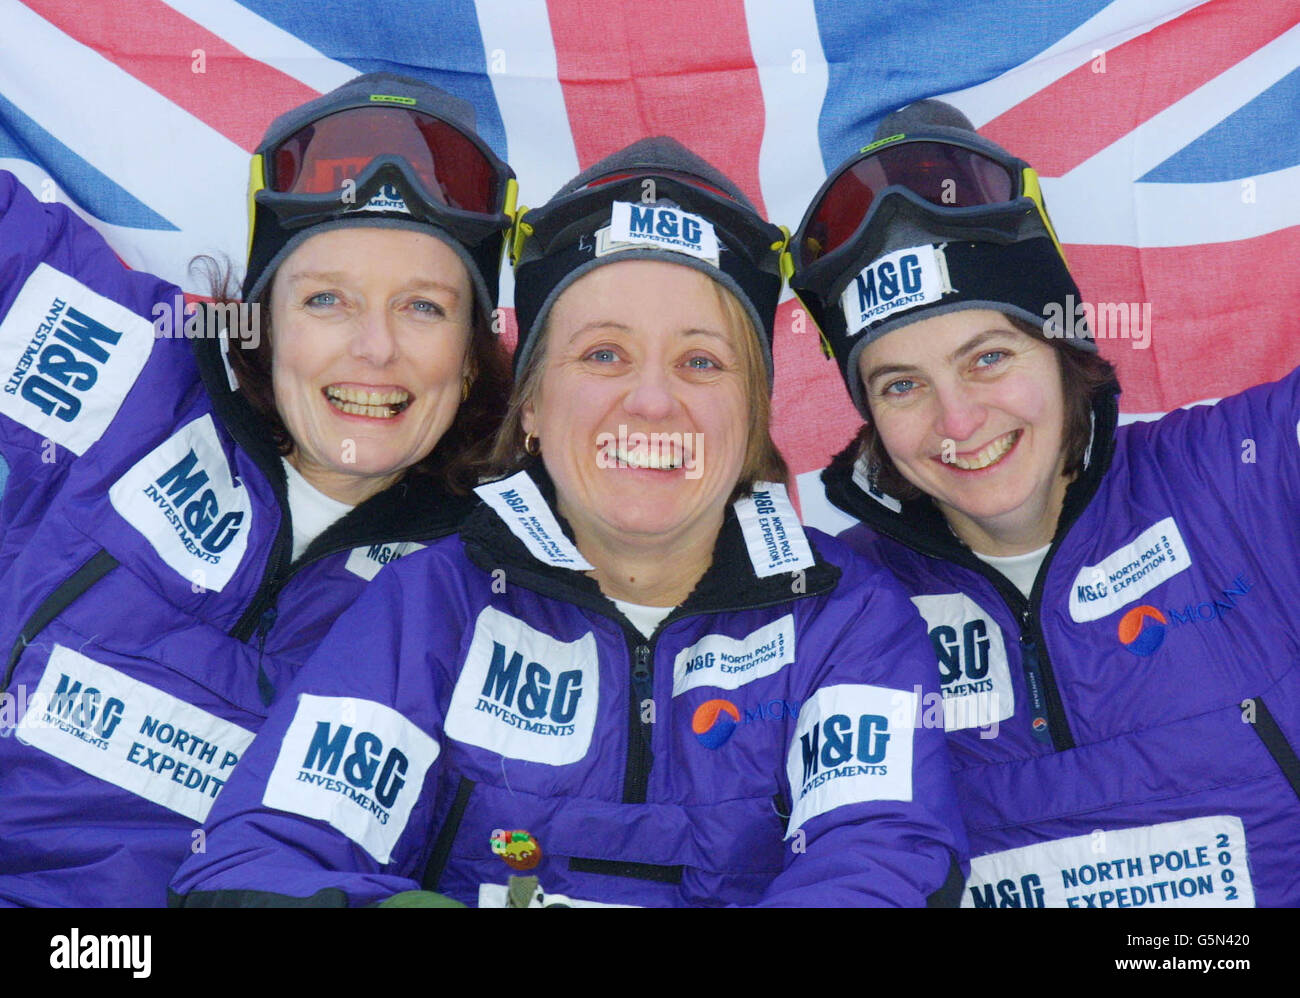 M&G Investments North Pole Expedition 2002 Stock Photo